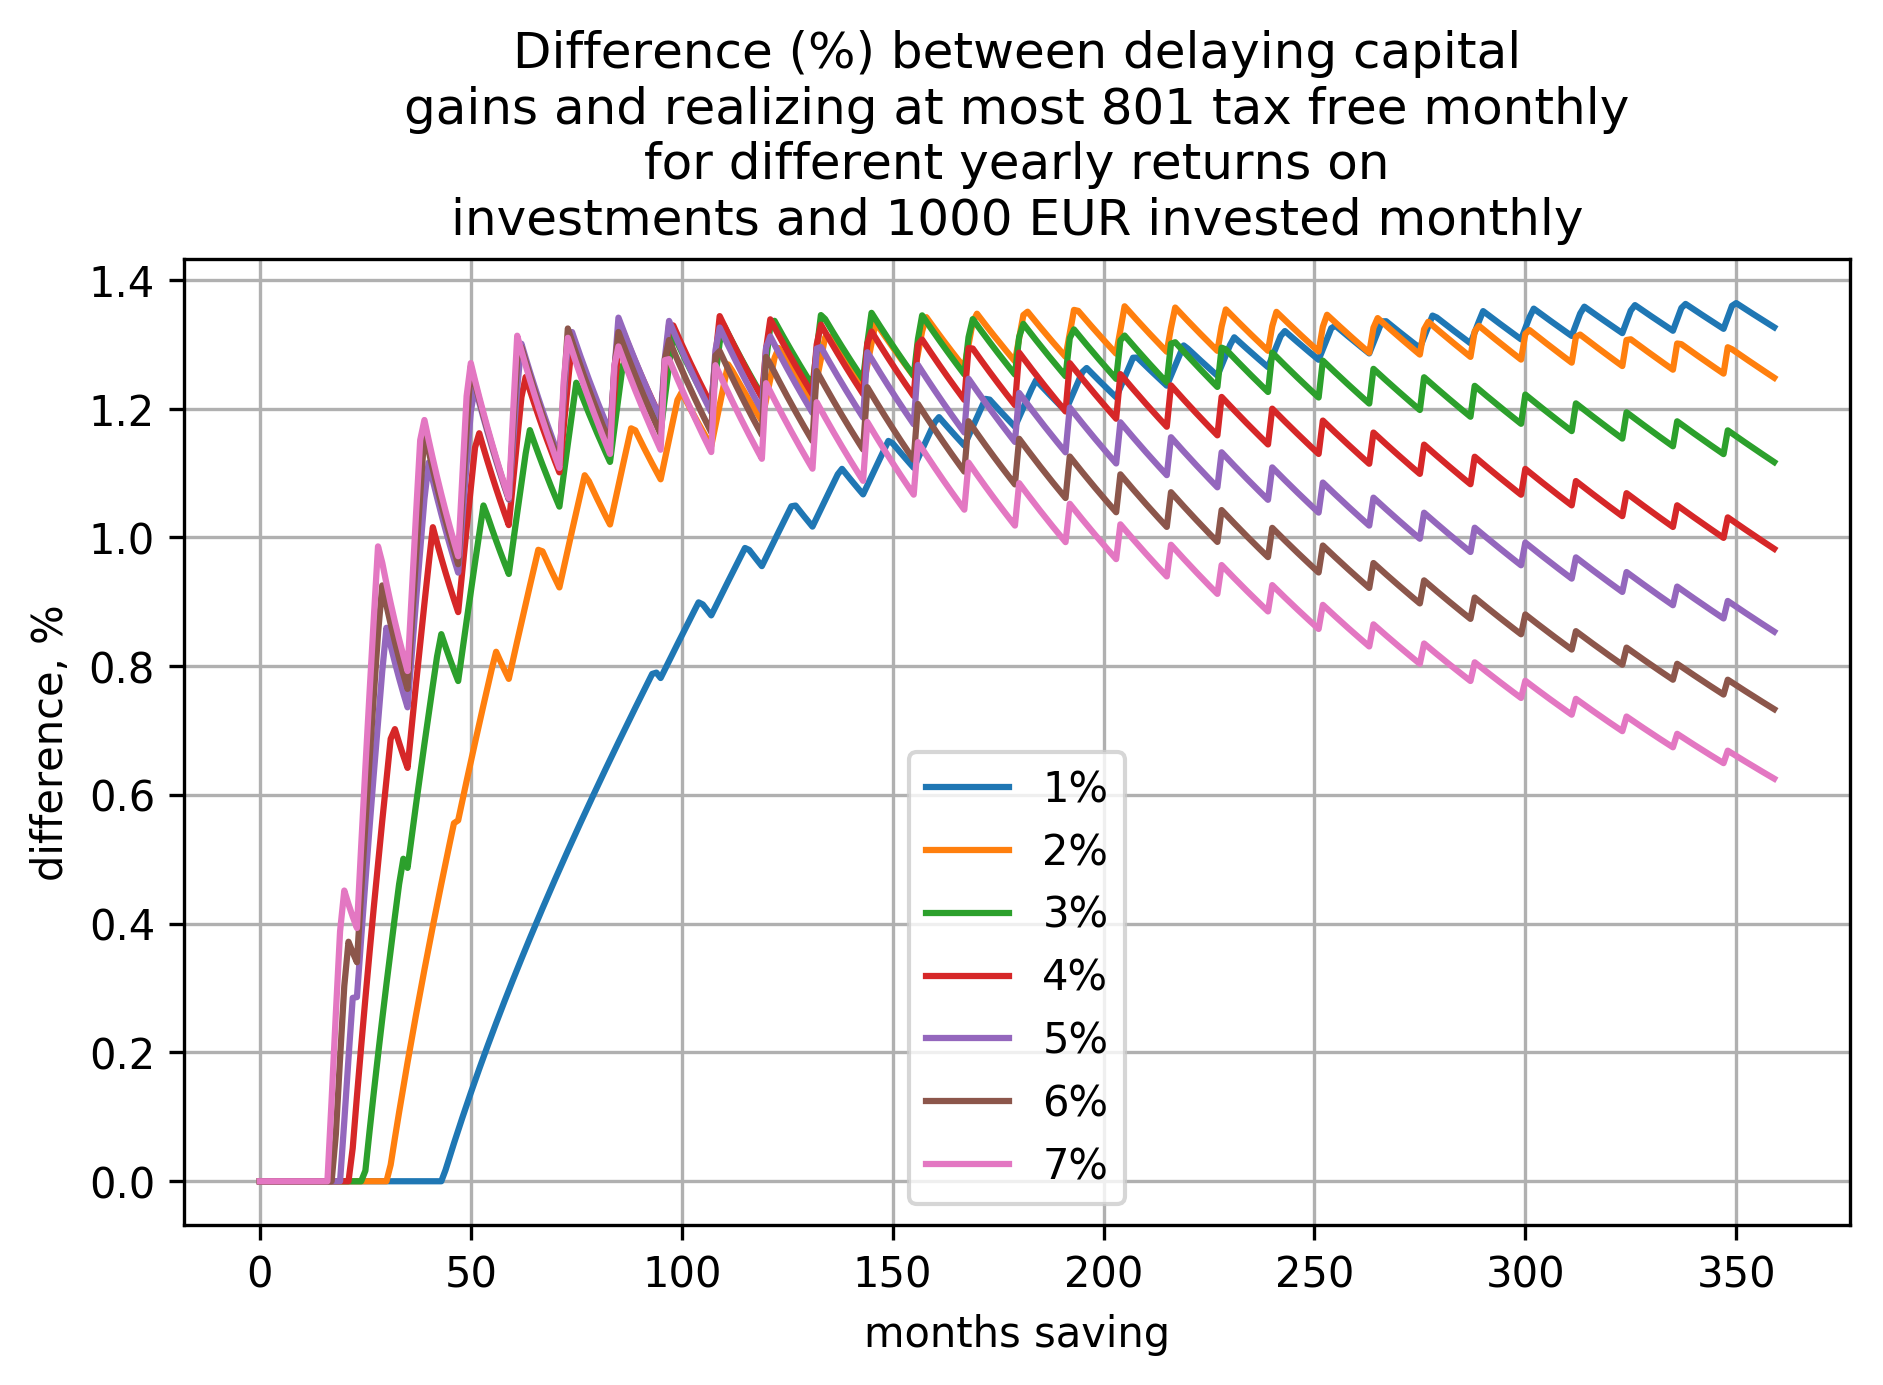 a plot showing how difference (in percents) between the two cases (delaying capital gains and
realizing at most 801€ tax free yearly) depends on time saving and yearly return on
investment when investing 1000€ per month